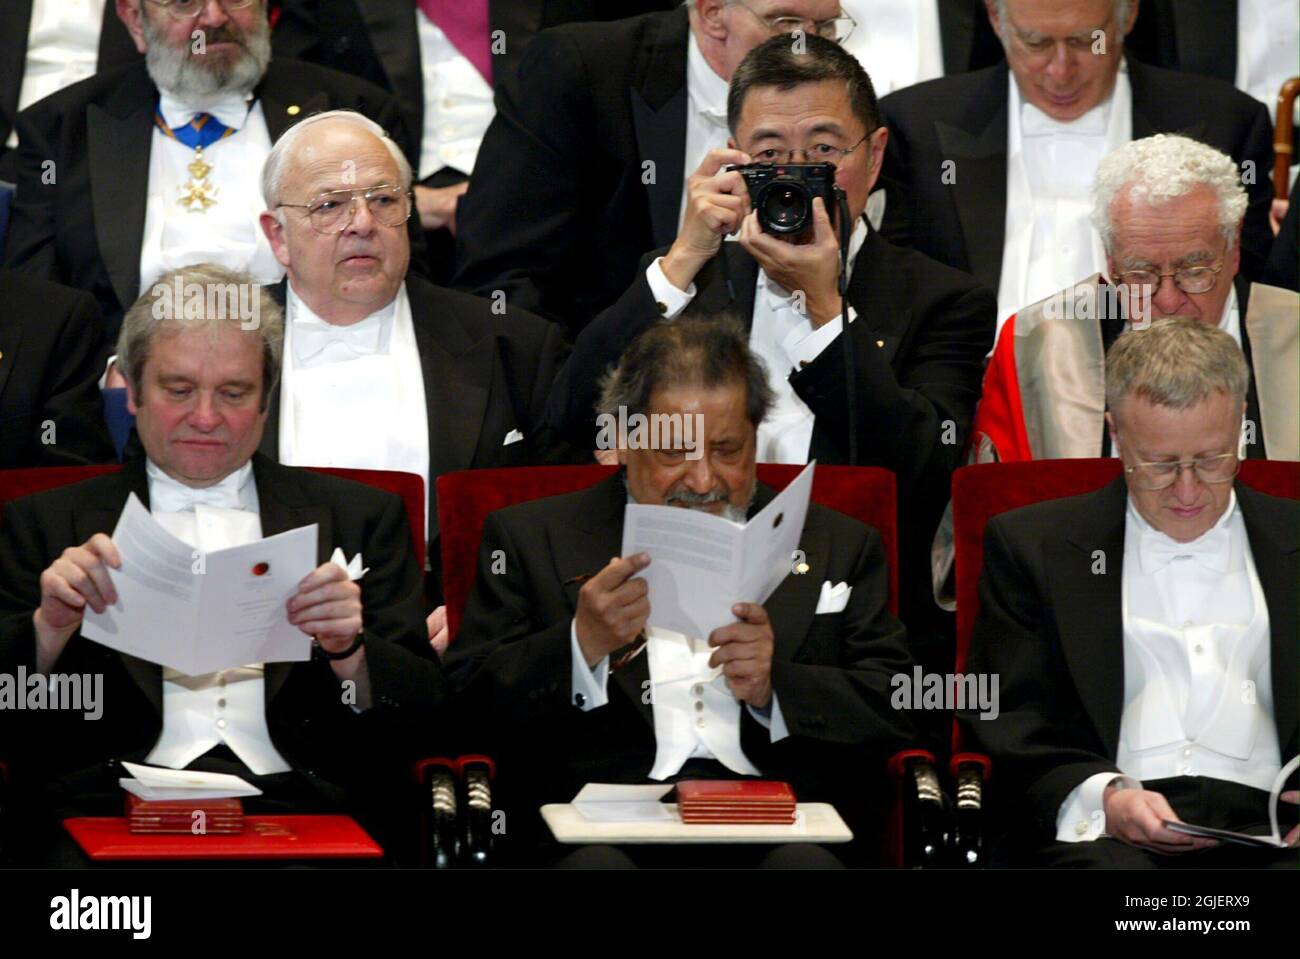 The Japanese 1976 Noble Prize winner for physics, Samuel Chao Chung Ting (2ND ROW, C), takes a photo of the audience during the centennial 2001 Nobel ceremony at the Concert Hall in Stockholm. In the first row are this years winners (L-R) British physics laureate Paul Nurse, British Literature laureate Sir V.S. Naipaul and American Economics laureate George A. Akerlof. Stock Photo